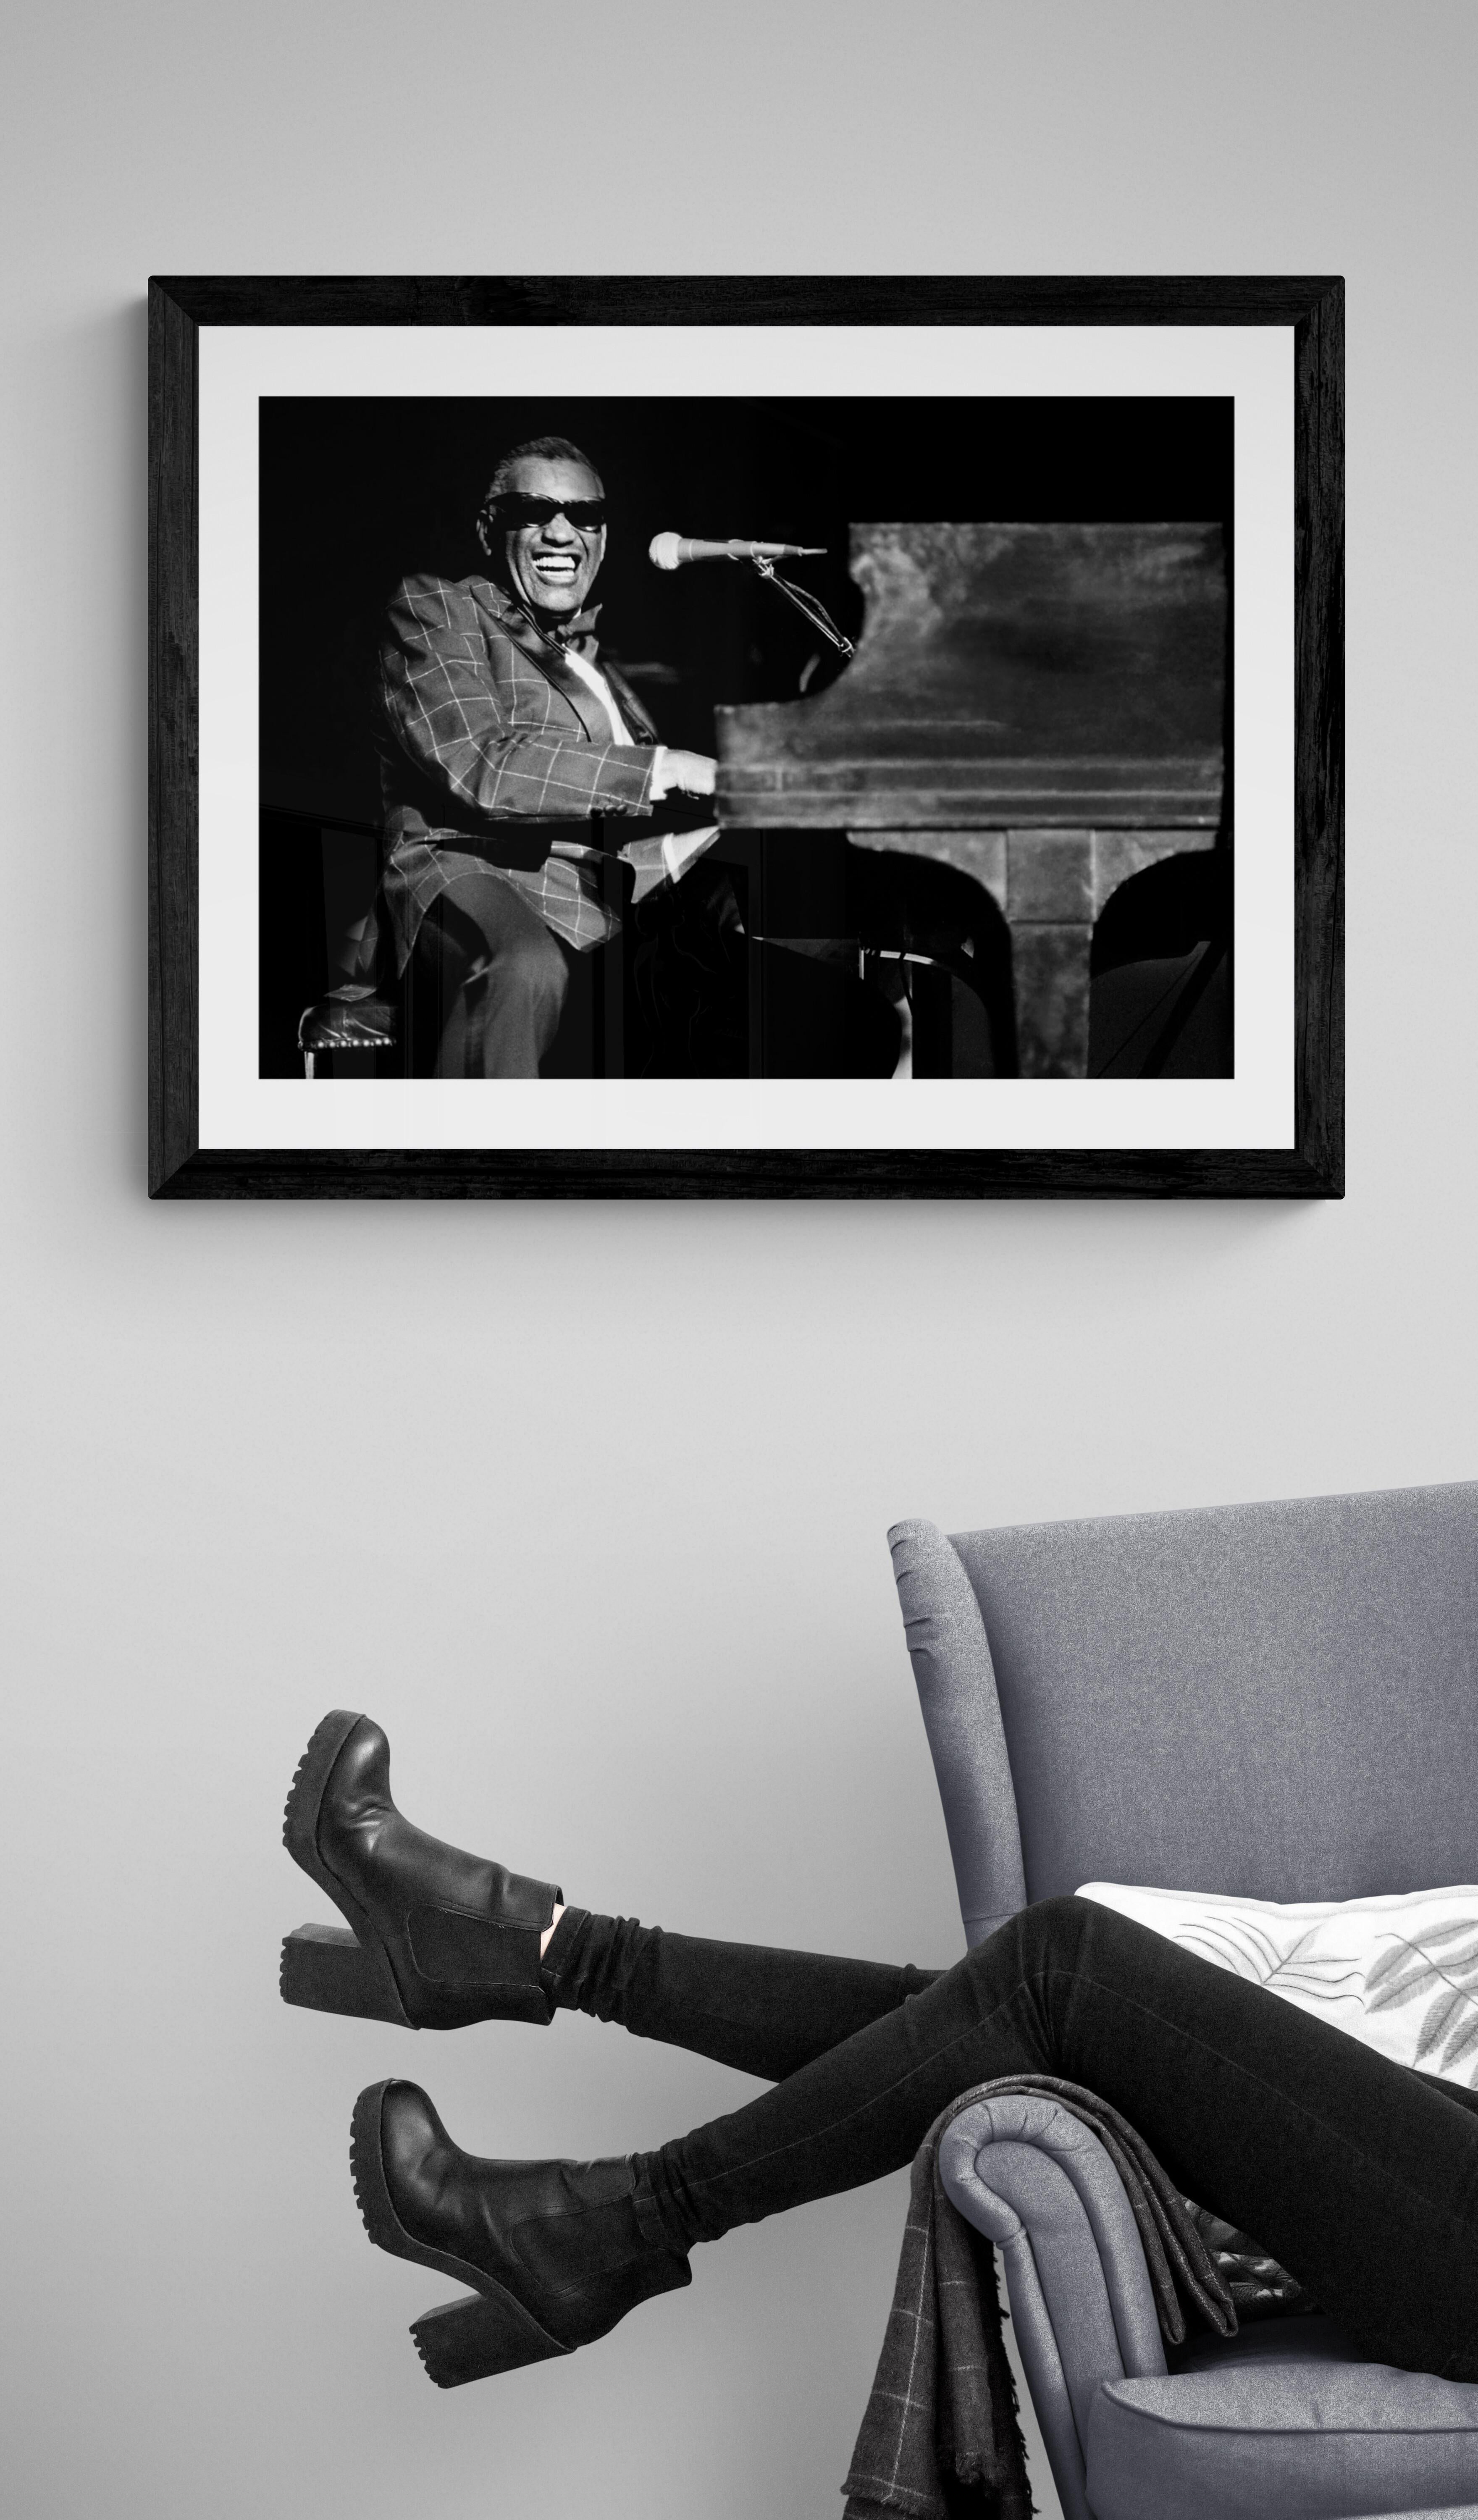 Title: Ray Charles #2 Photo
Artist: Richard E. Aaron
Estate Edition: Hand numbered with estate chop mark in the margin, signature stamp on verso, archival pigment print on Hahnemühle Photo Rag Pearl, 100% cotton paper fine art paper. Authorized